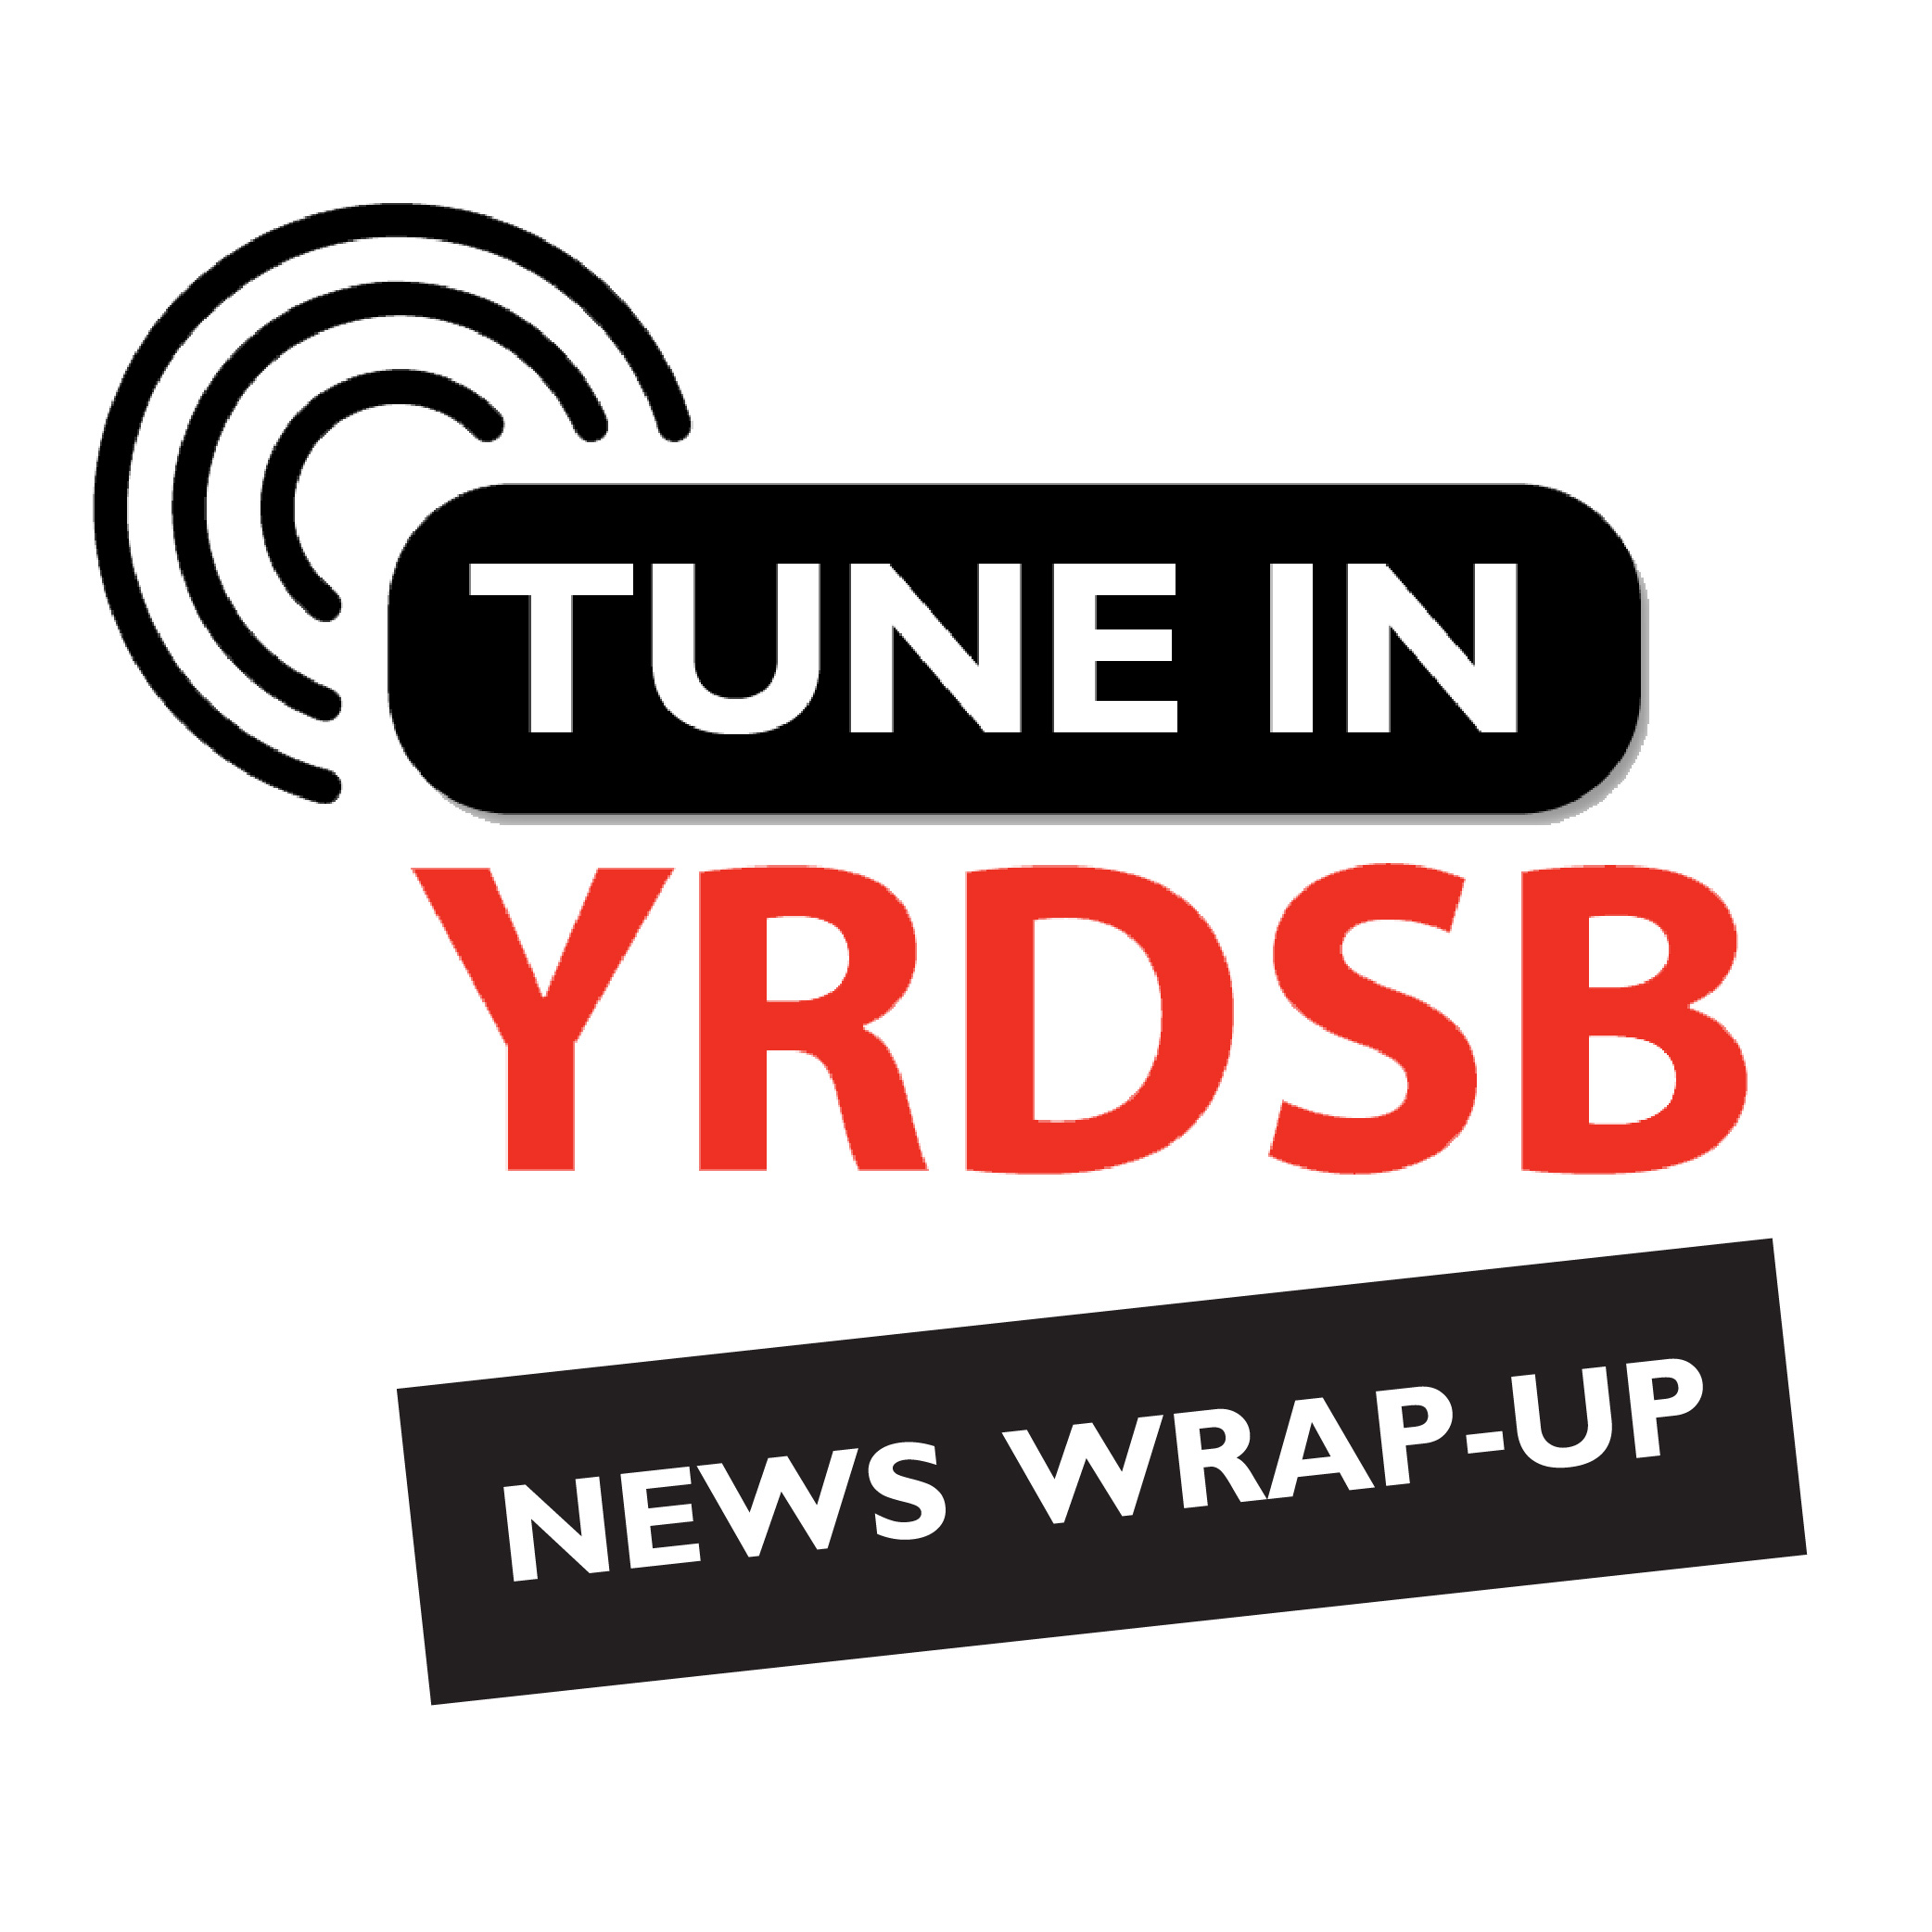 Text and logo: Tune In YRDSB News Wrap Up